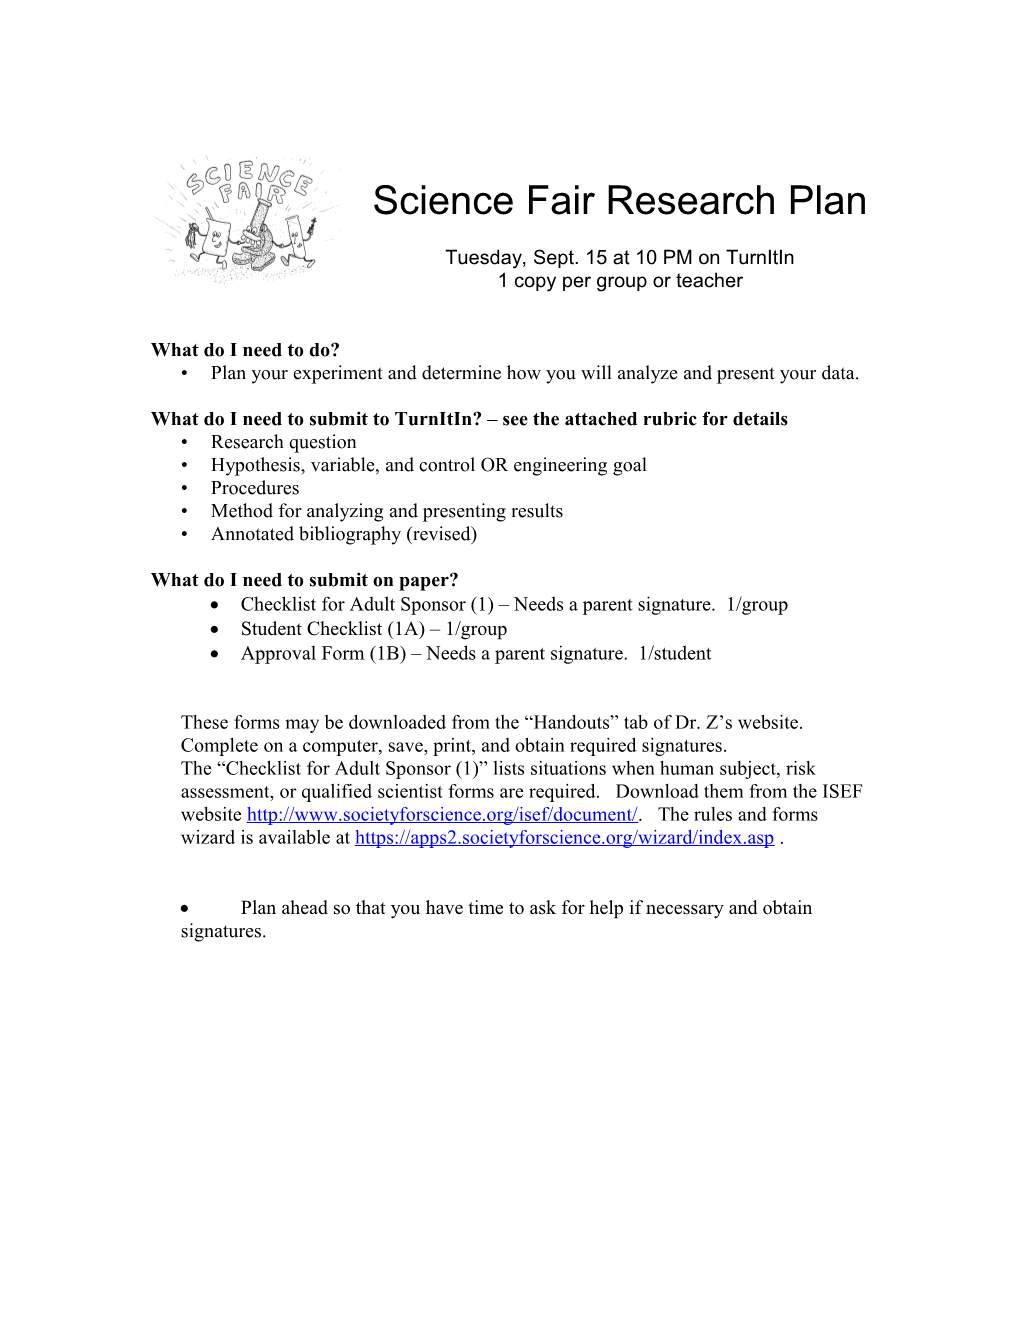 Rubric for Science Fair Introduction and Materials and Methods